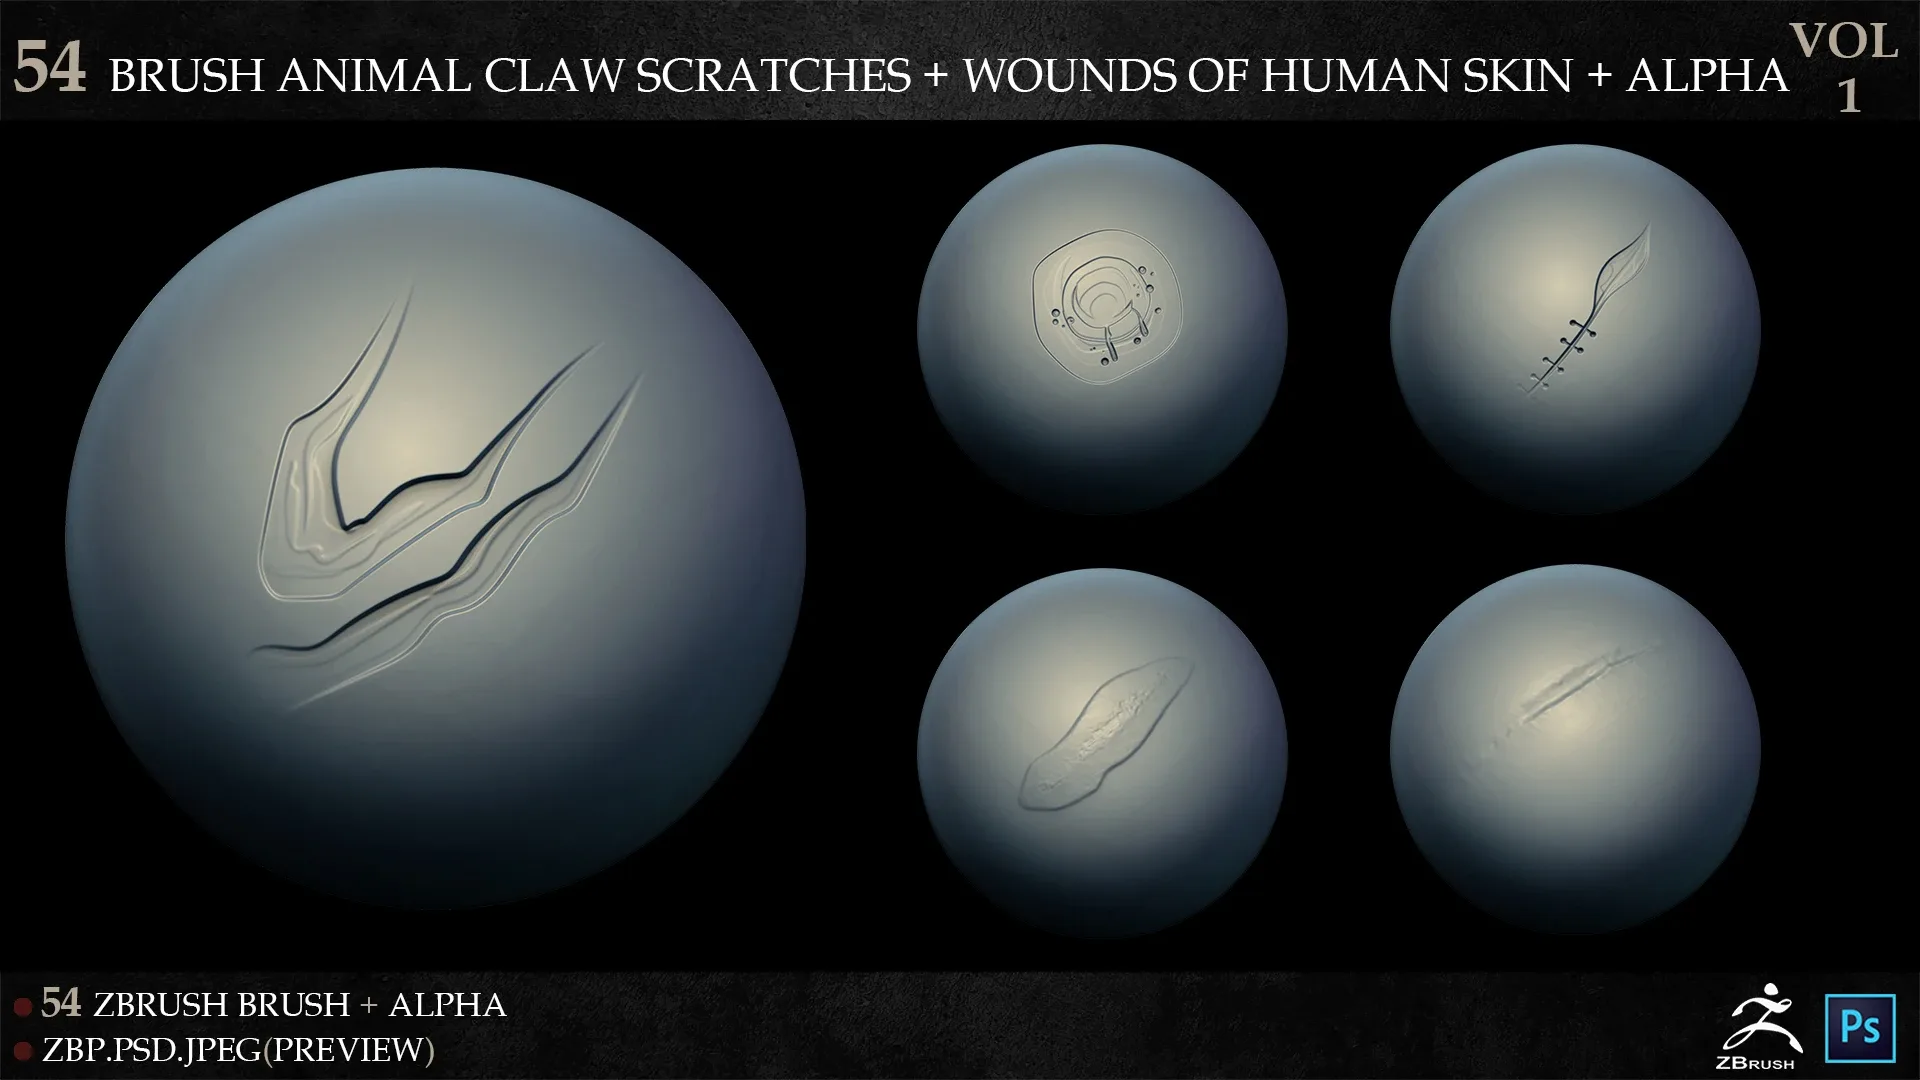 54 ZBRUSH ANIMAL CLAW SCRATCHES + WOUNDS OF HUMAN SKIN + ALPHA